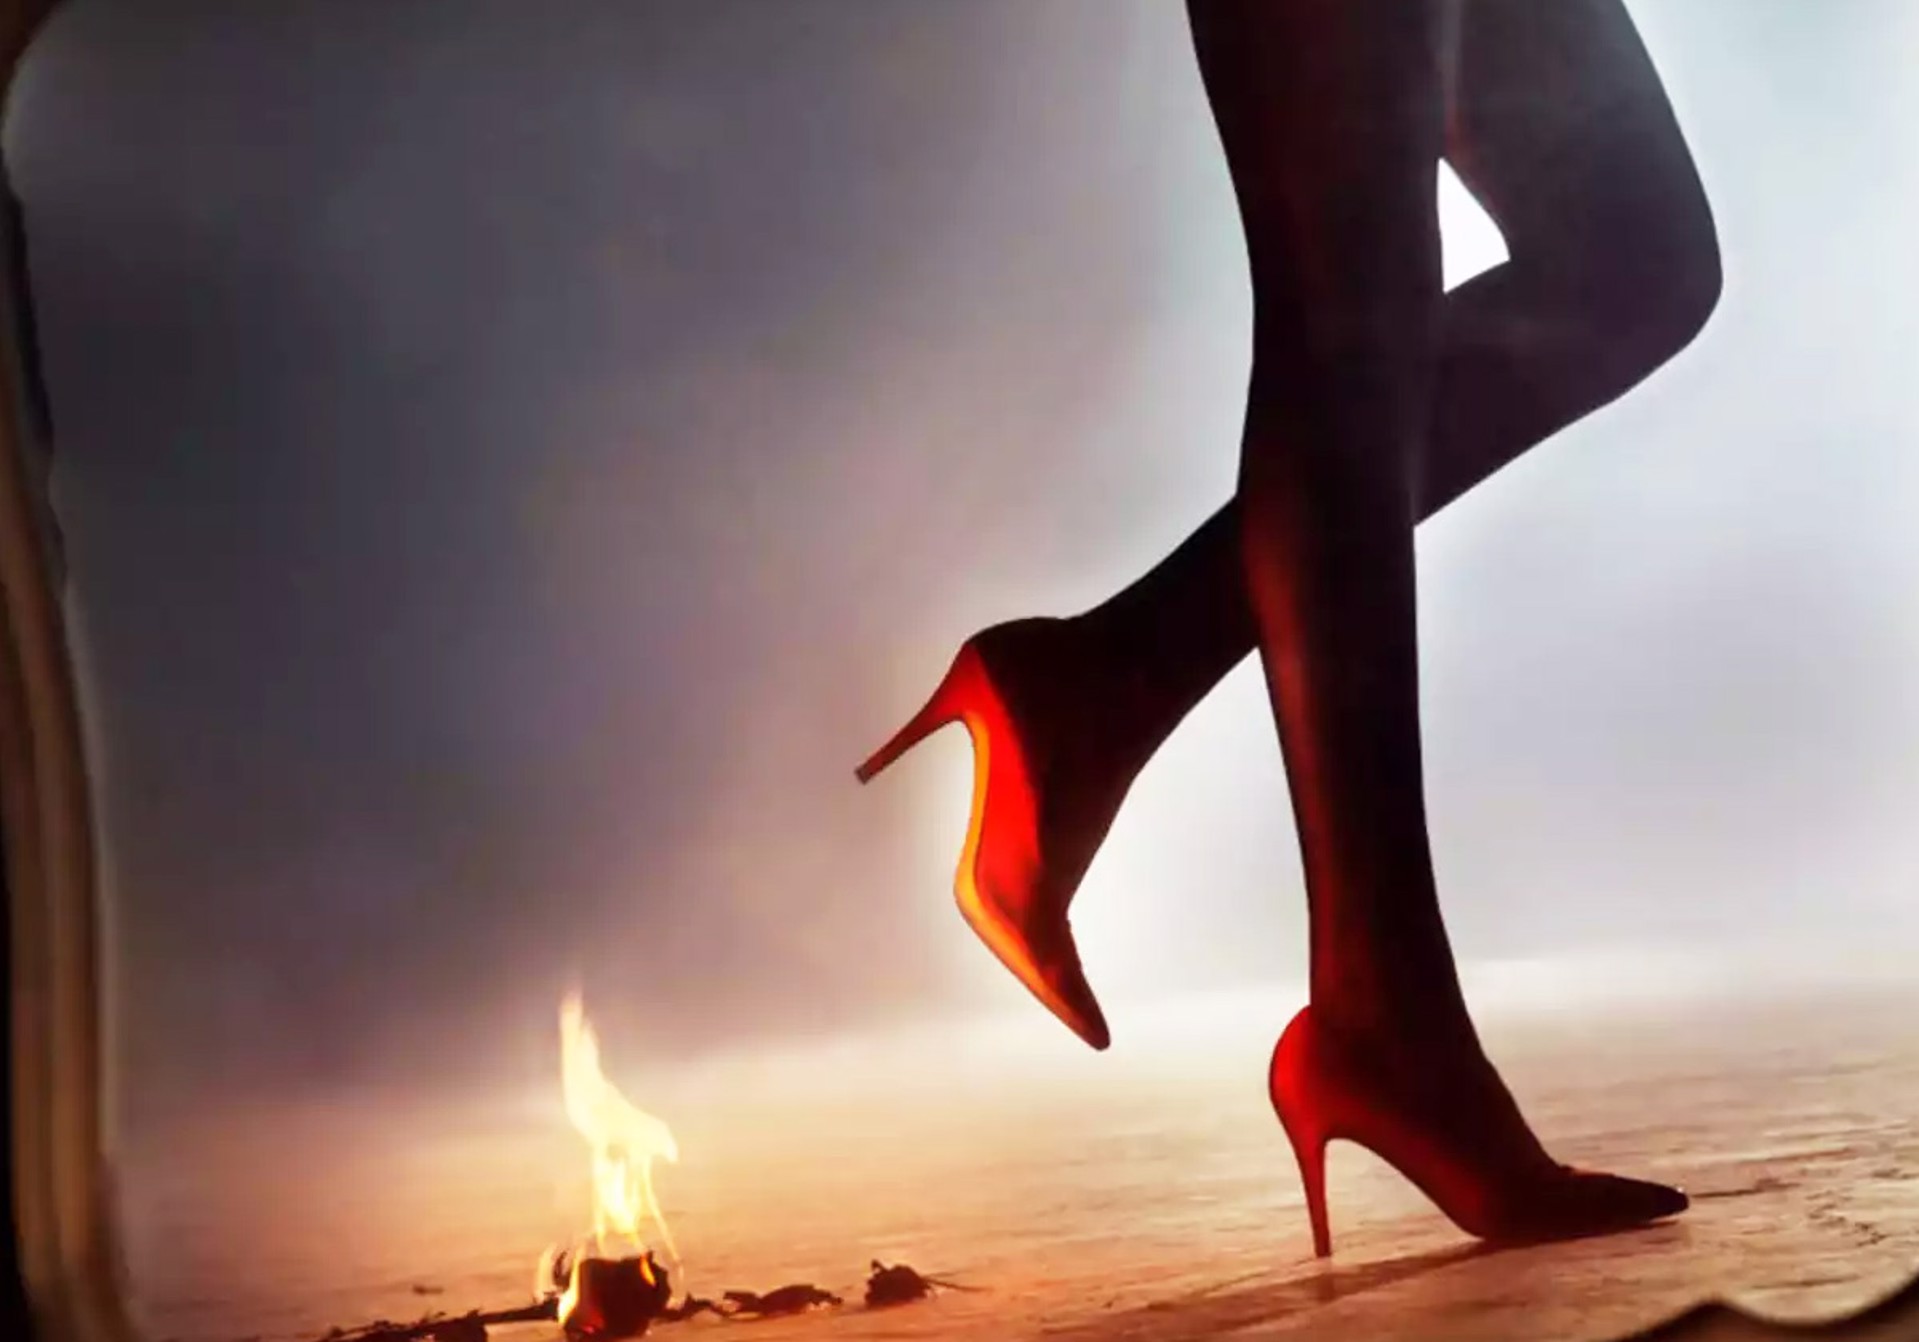 Playing with Fire by David Drebin